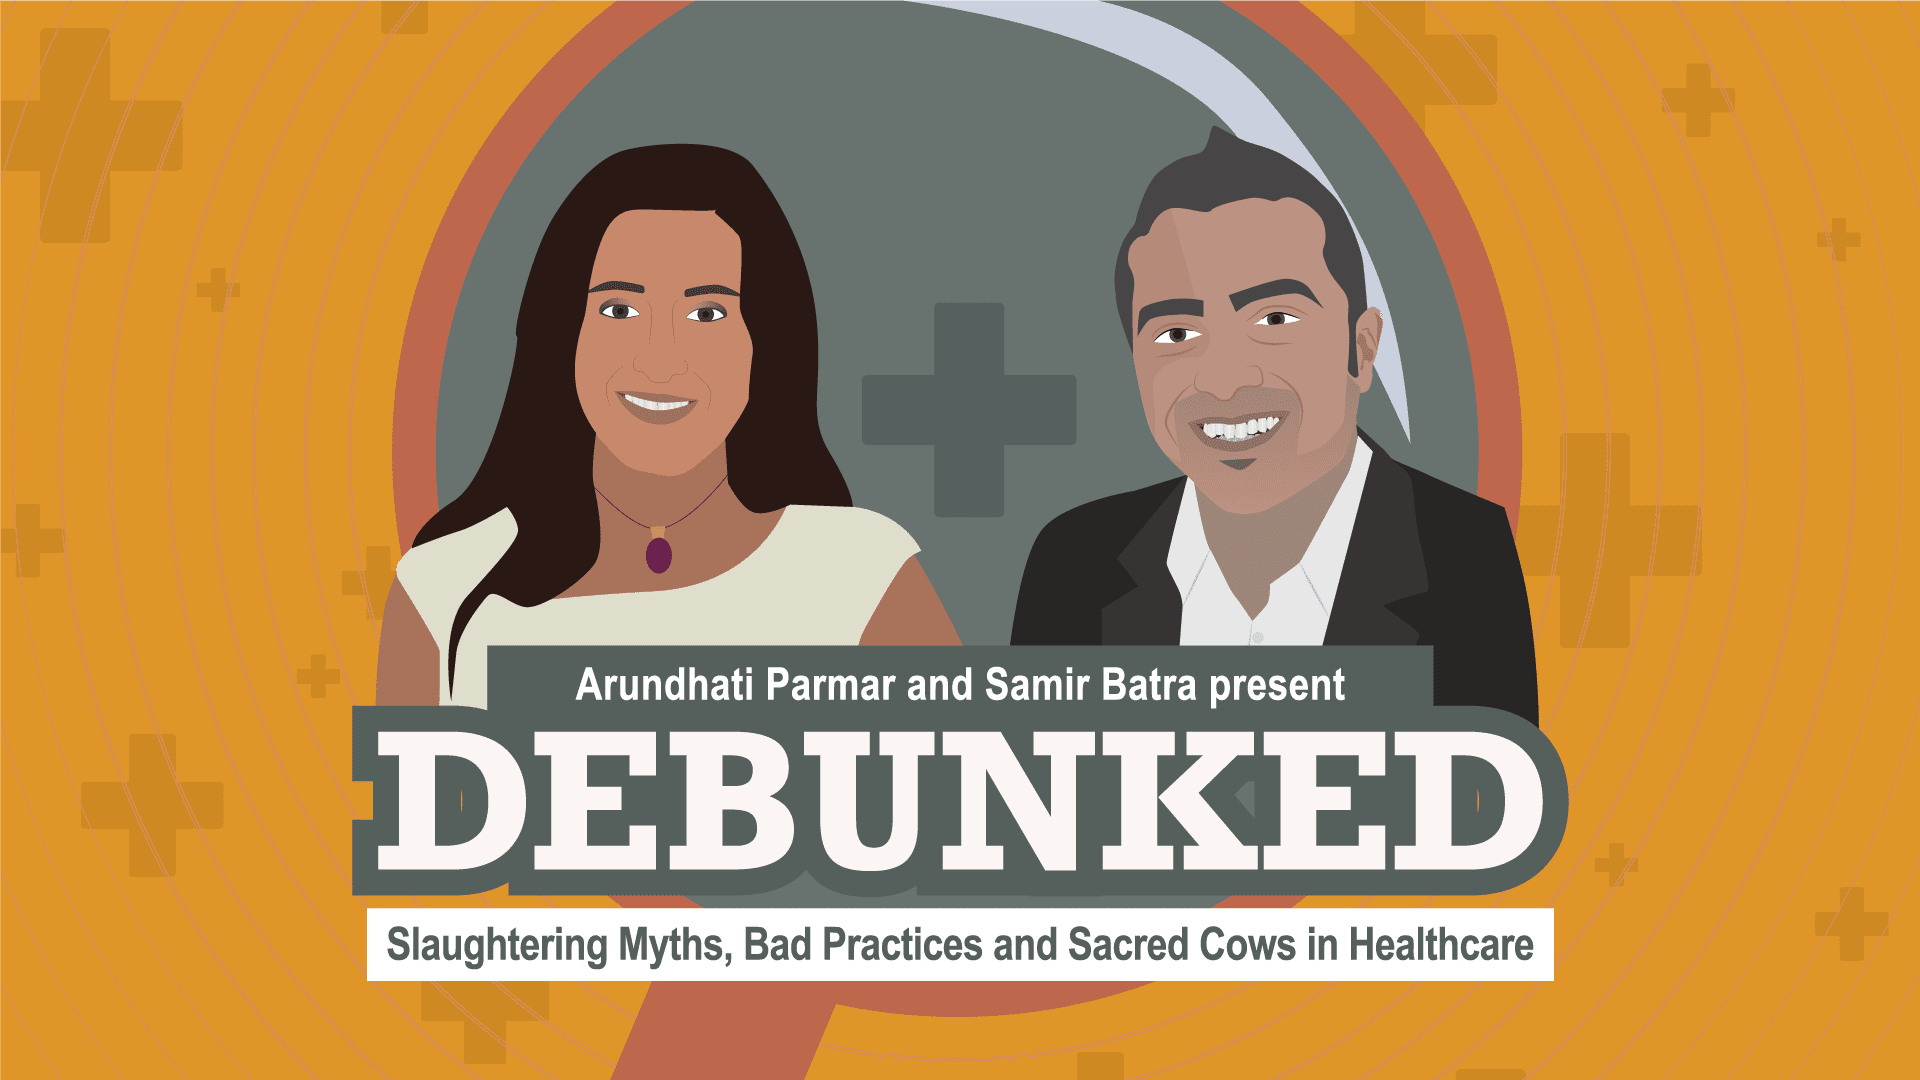 MedCity News Launches Debunked, A Show Where We Slaughter Myths, Bad Practices and Sacred Cows in Healthcare - MedCity News